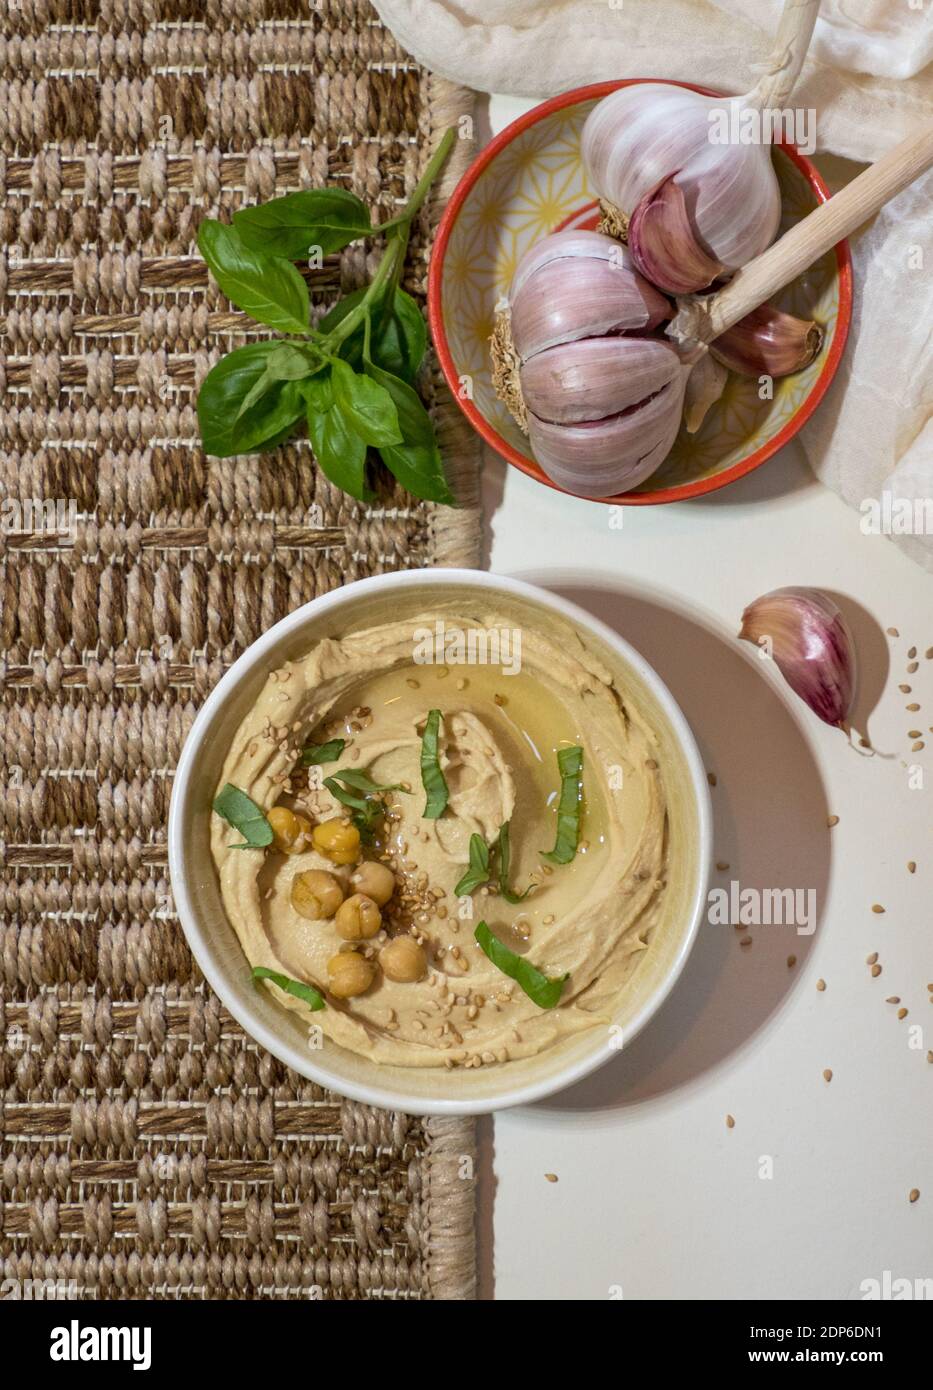 Bowl with freshly made, creamy hummus with chickpeas, basil and garlic isolated on colourful background Stock Photo